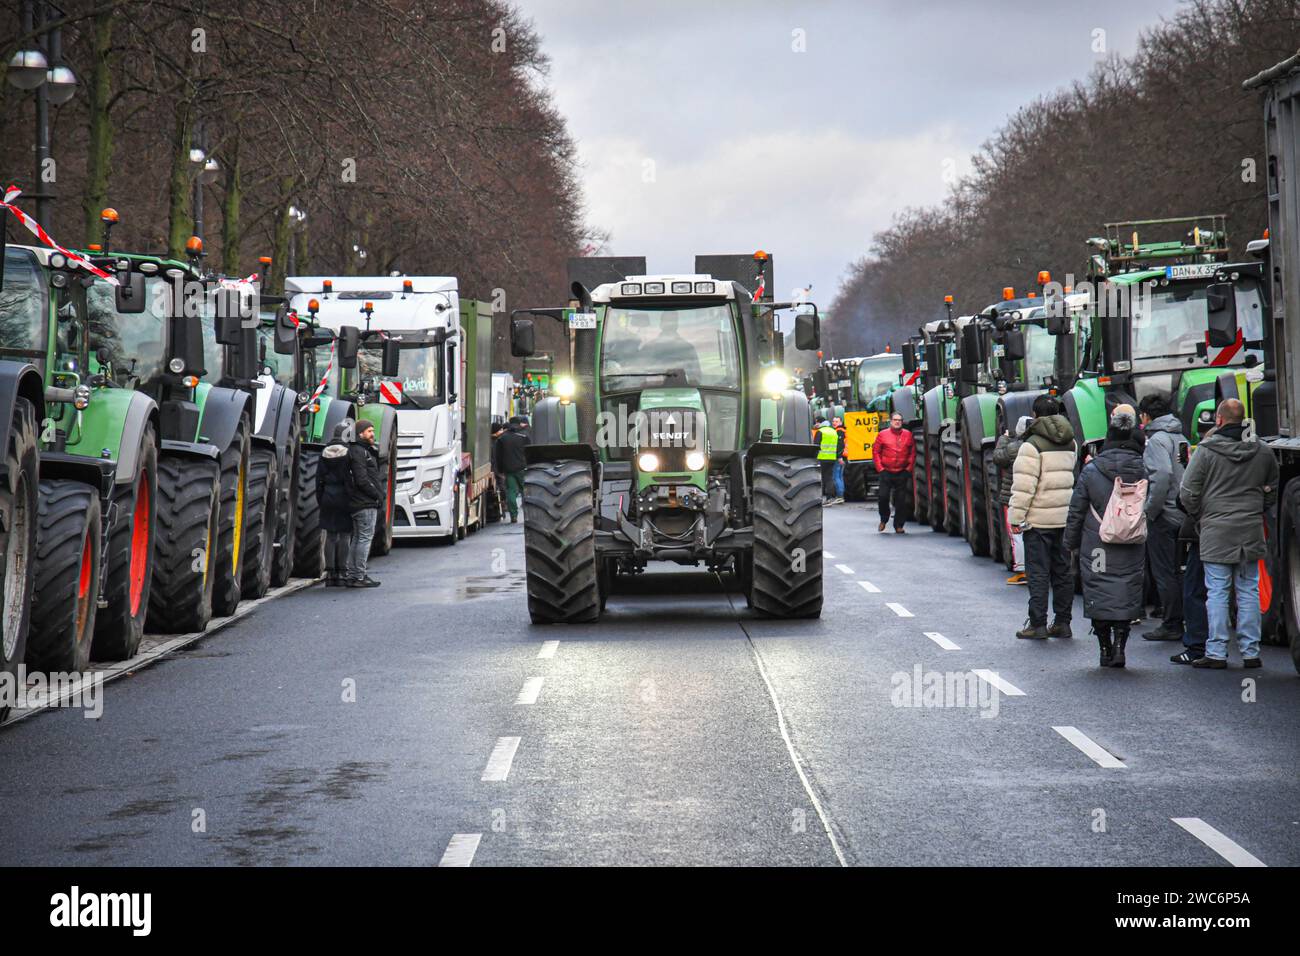 Berlin,Germany 14th january 2024.Farmers and truckers are protesting at the Brandenburger Tor against subsidy cuts.Credit:Pmvfoto/Alamy Live News Stock Photo